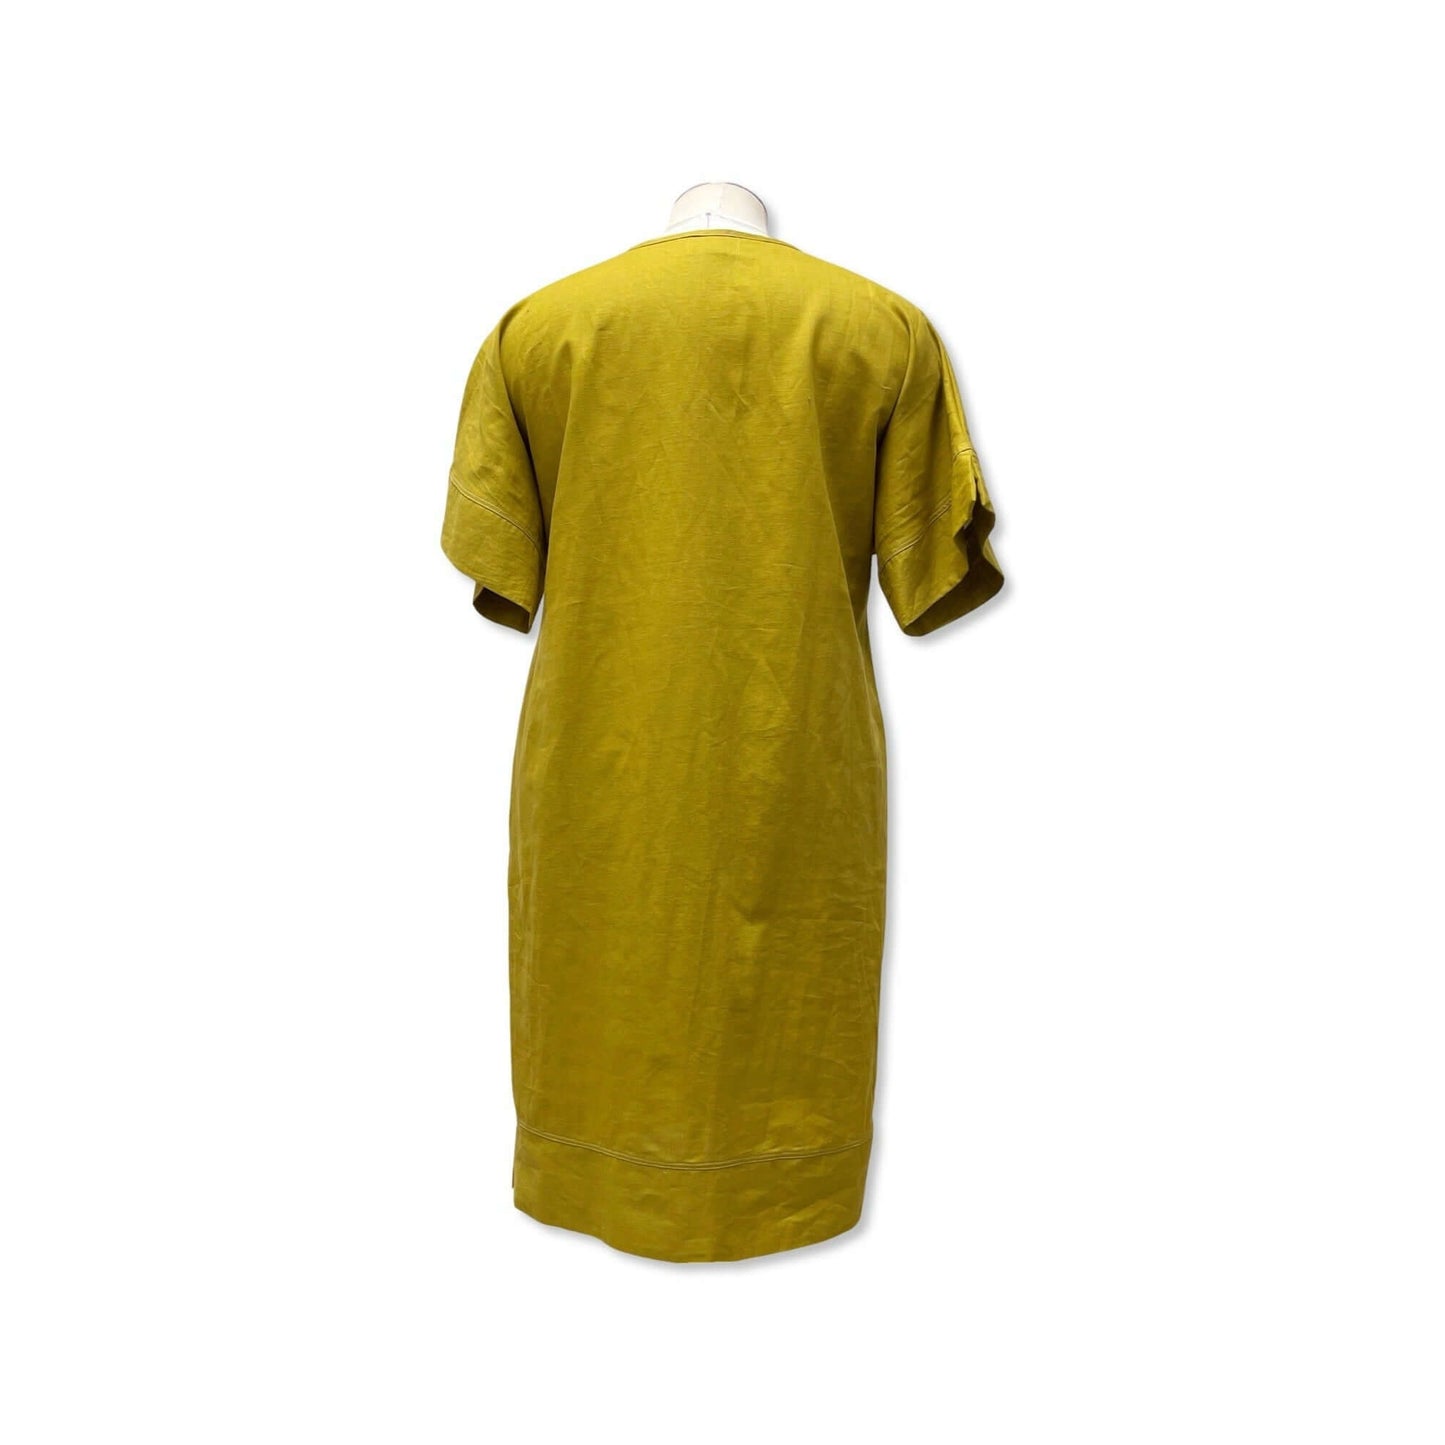 Bloom Clothing NZ,SPLIT THE DIFFERENCE DRESS - Pear,$279.00,